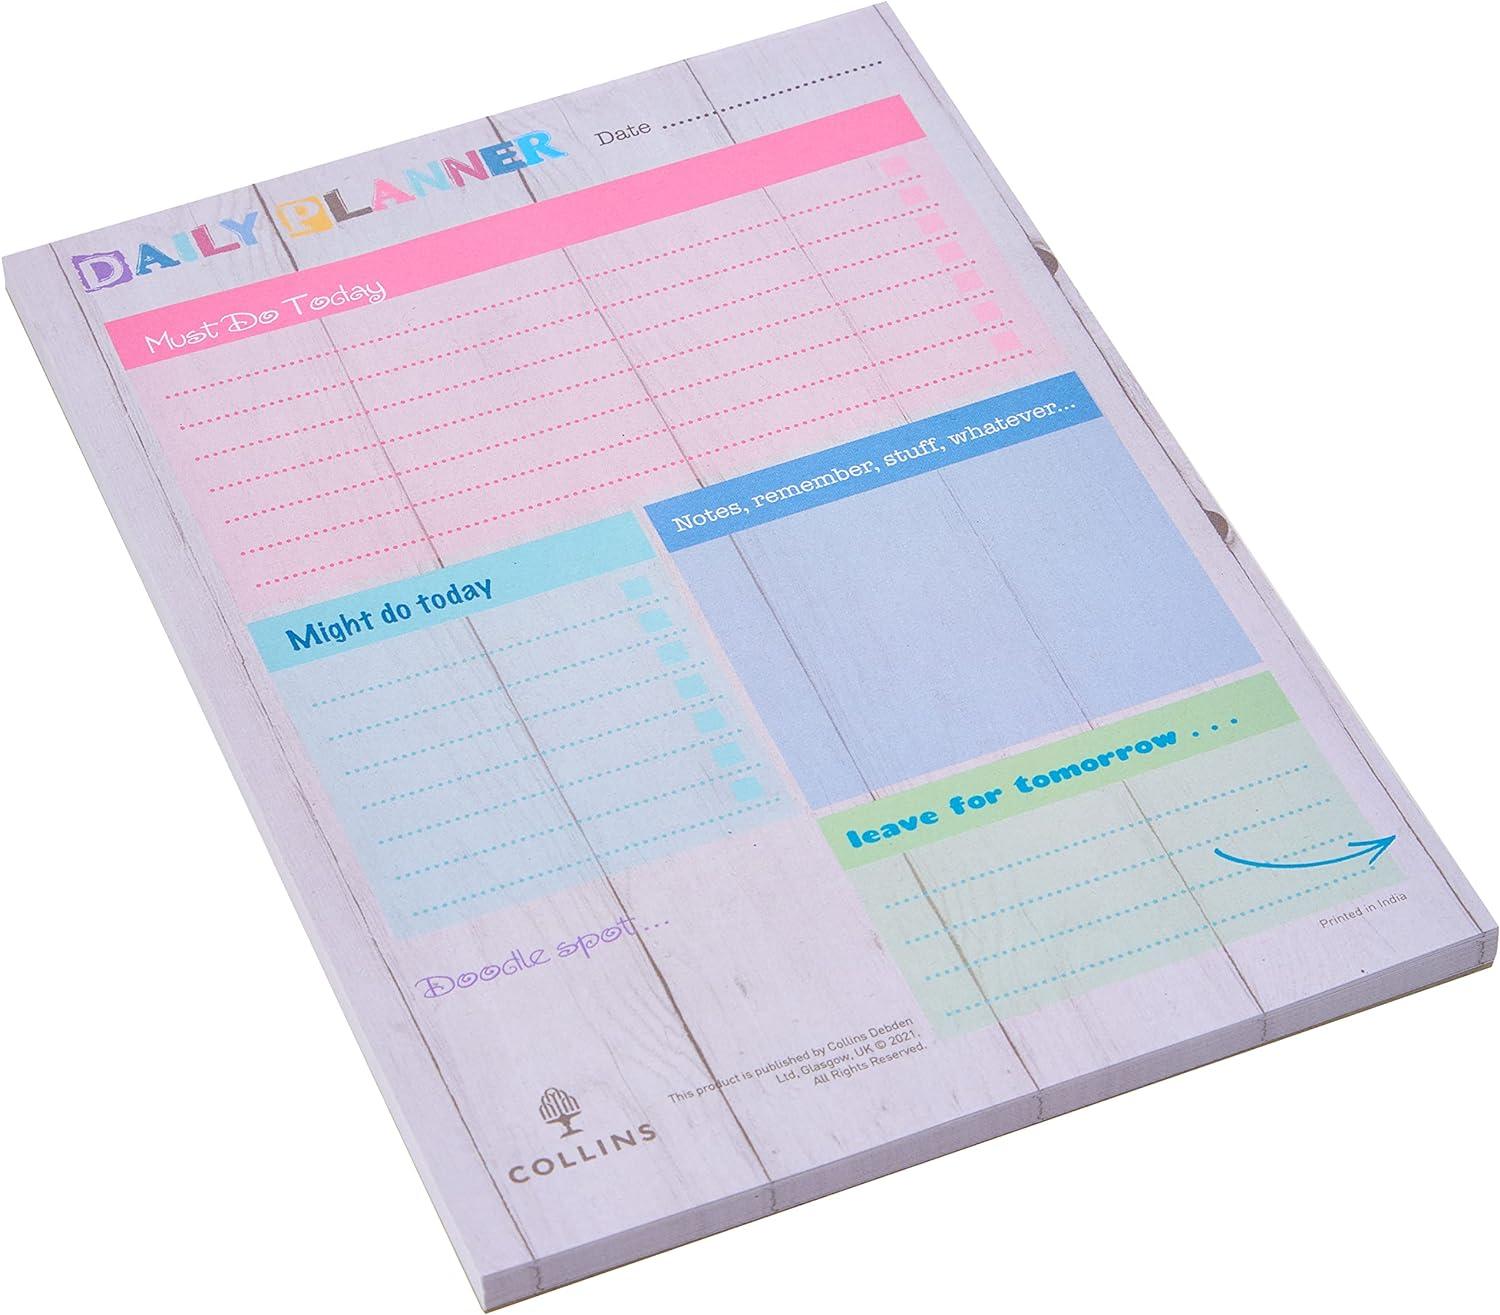 collins a5 unique layout 2019 daily planner pad pack of 60 sheets pack of  collins b016ol397o